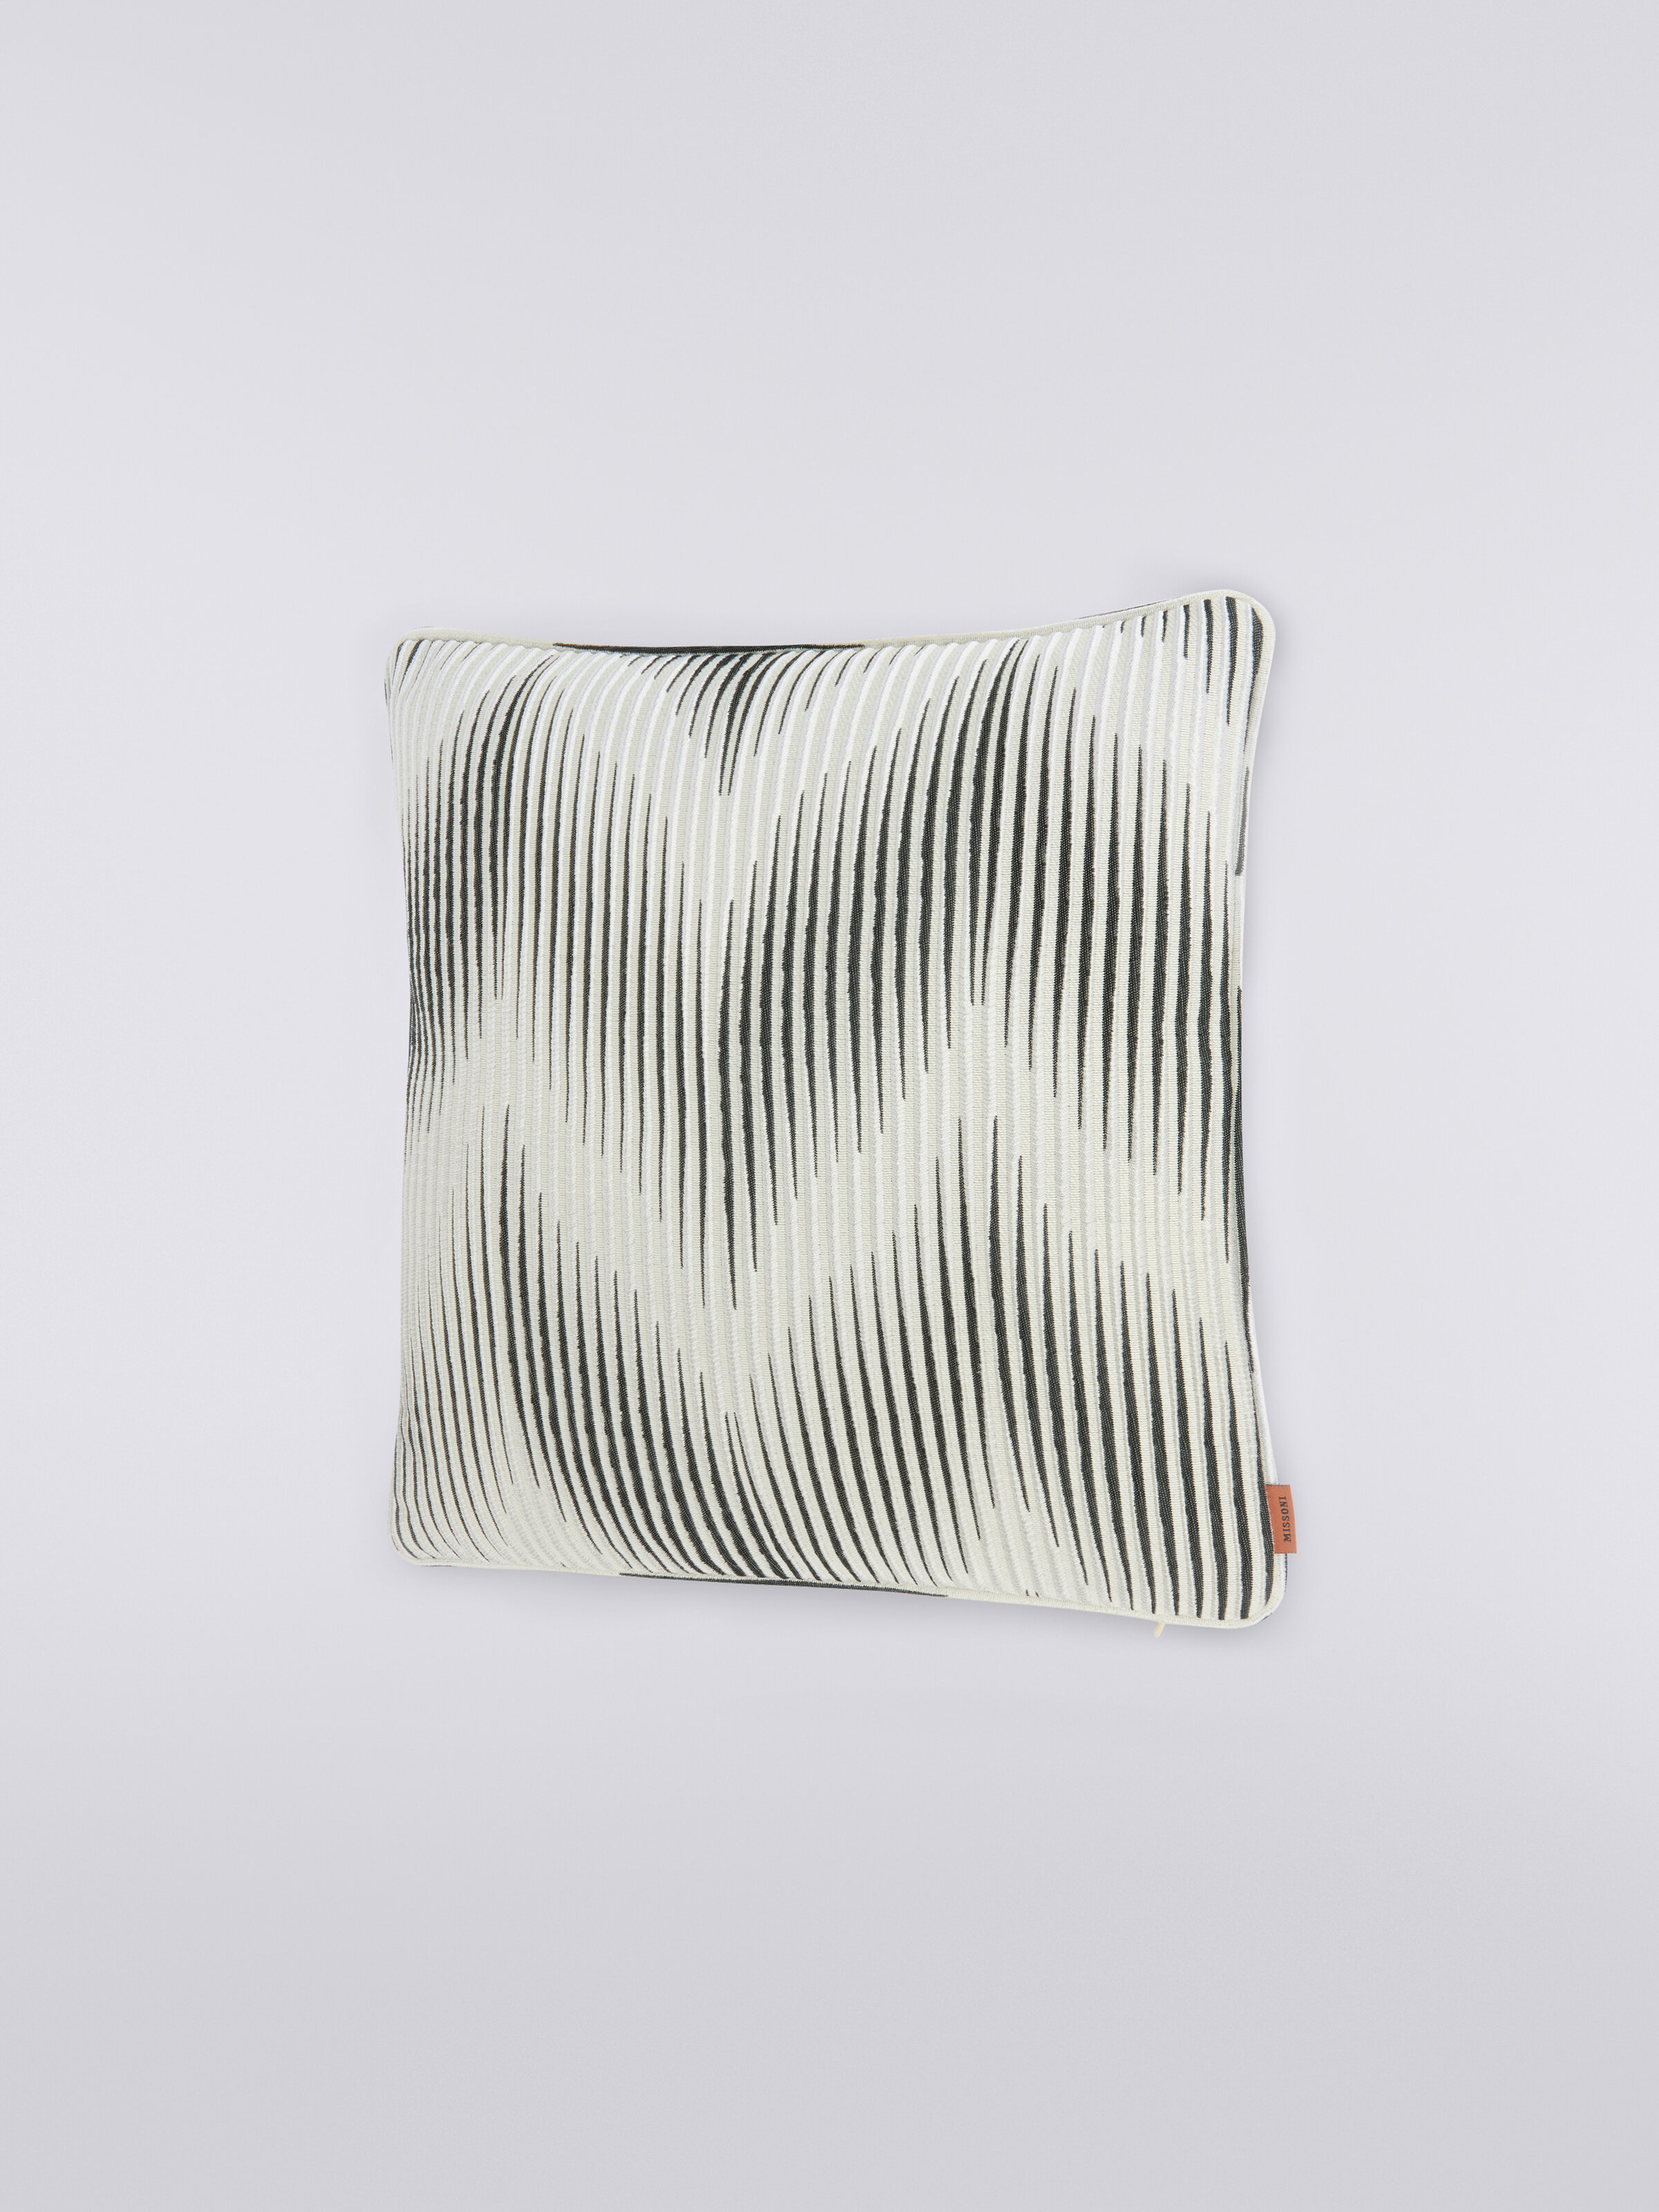 Ande 40x40 cm cushion with faded chevron, Black & White - 1